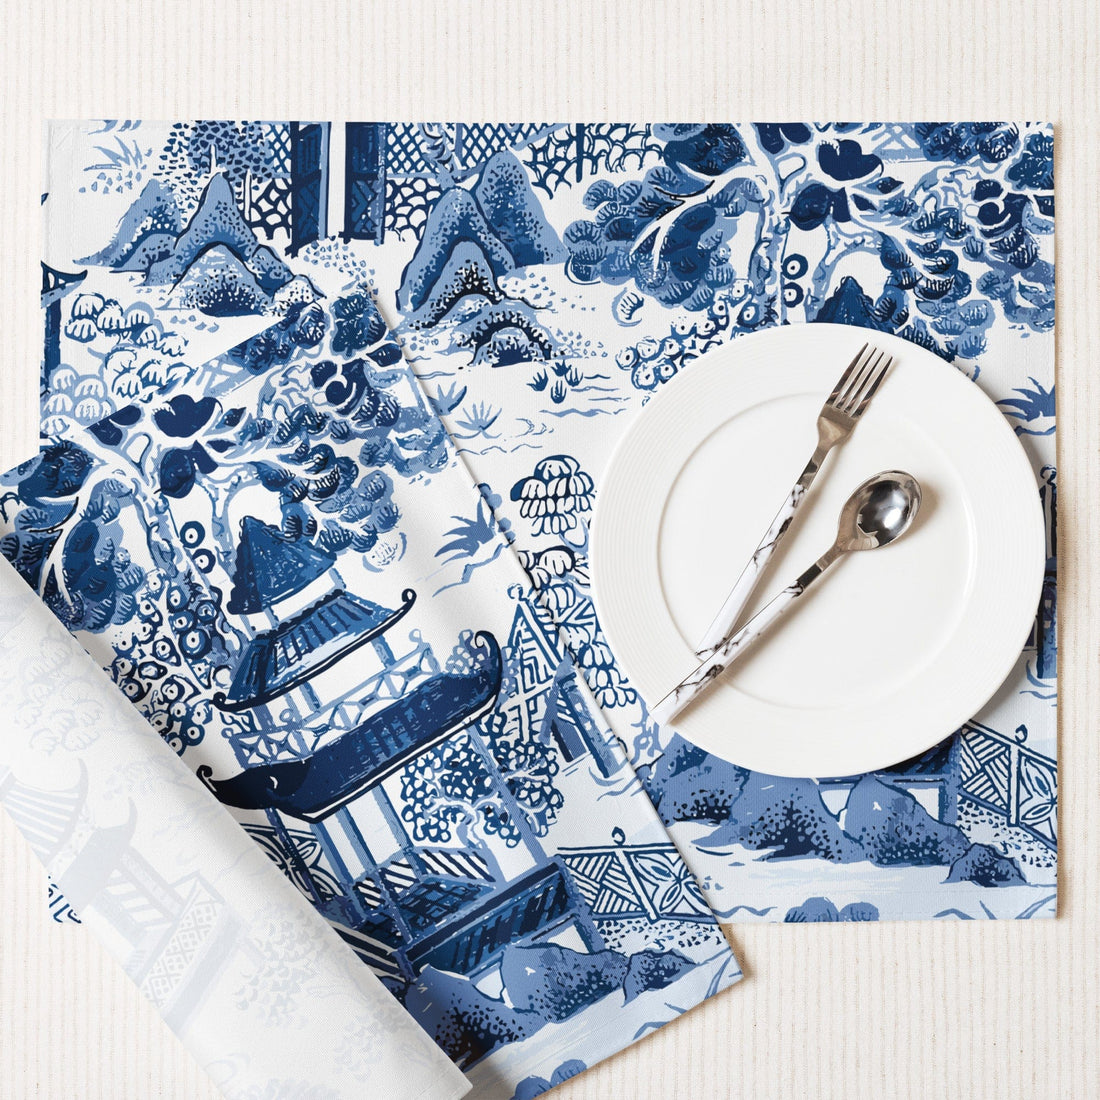 Kate McEnroe New York Set of 4 Chinoiserie Peacock Placemats, Blue and White Floral Print, Elegant Table Linens, Oriental Bird Design, Chic Dining DecorPlacemats6439711_17484